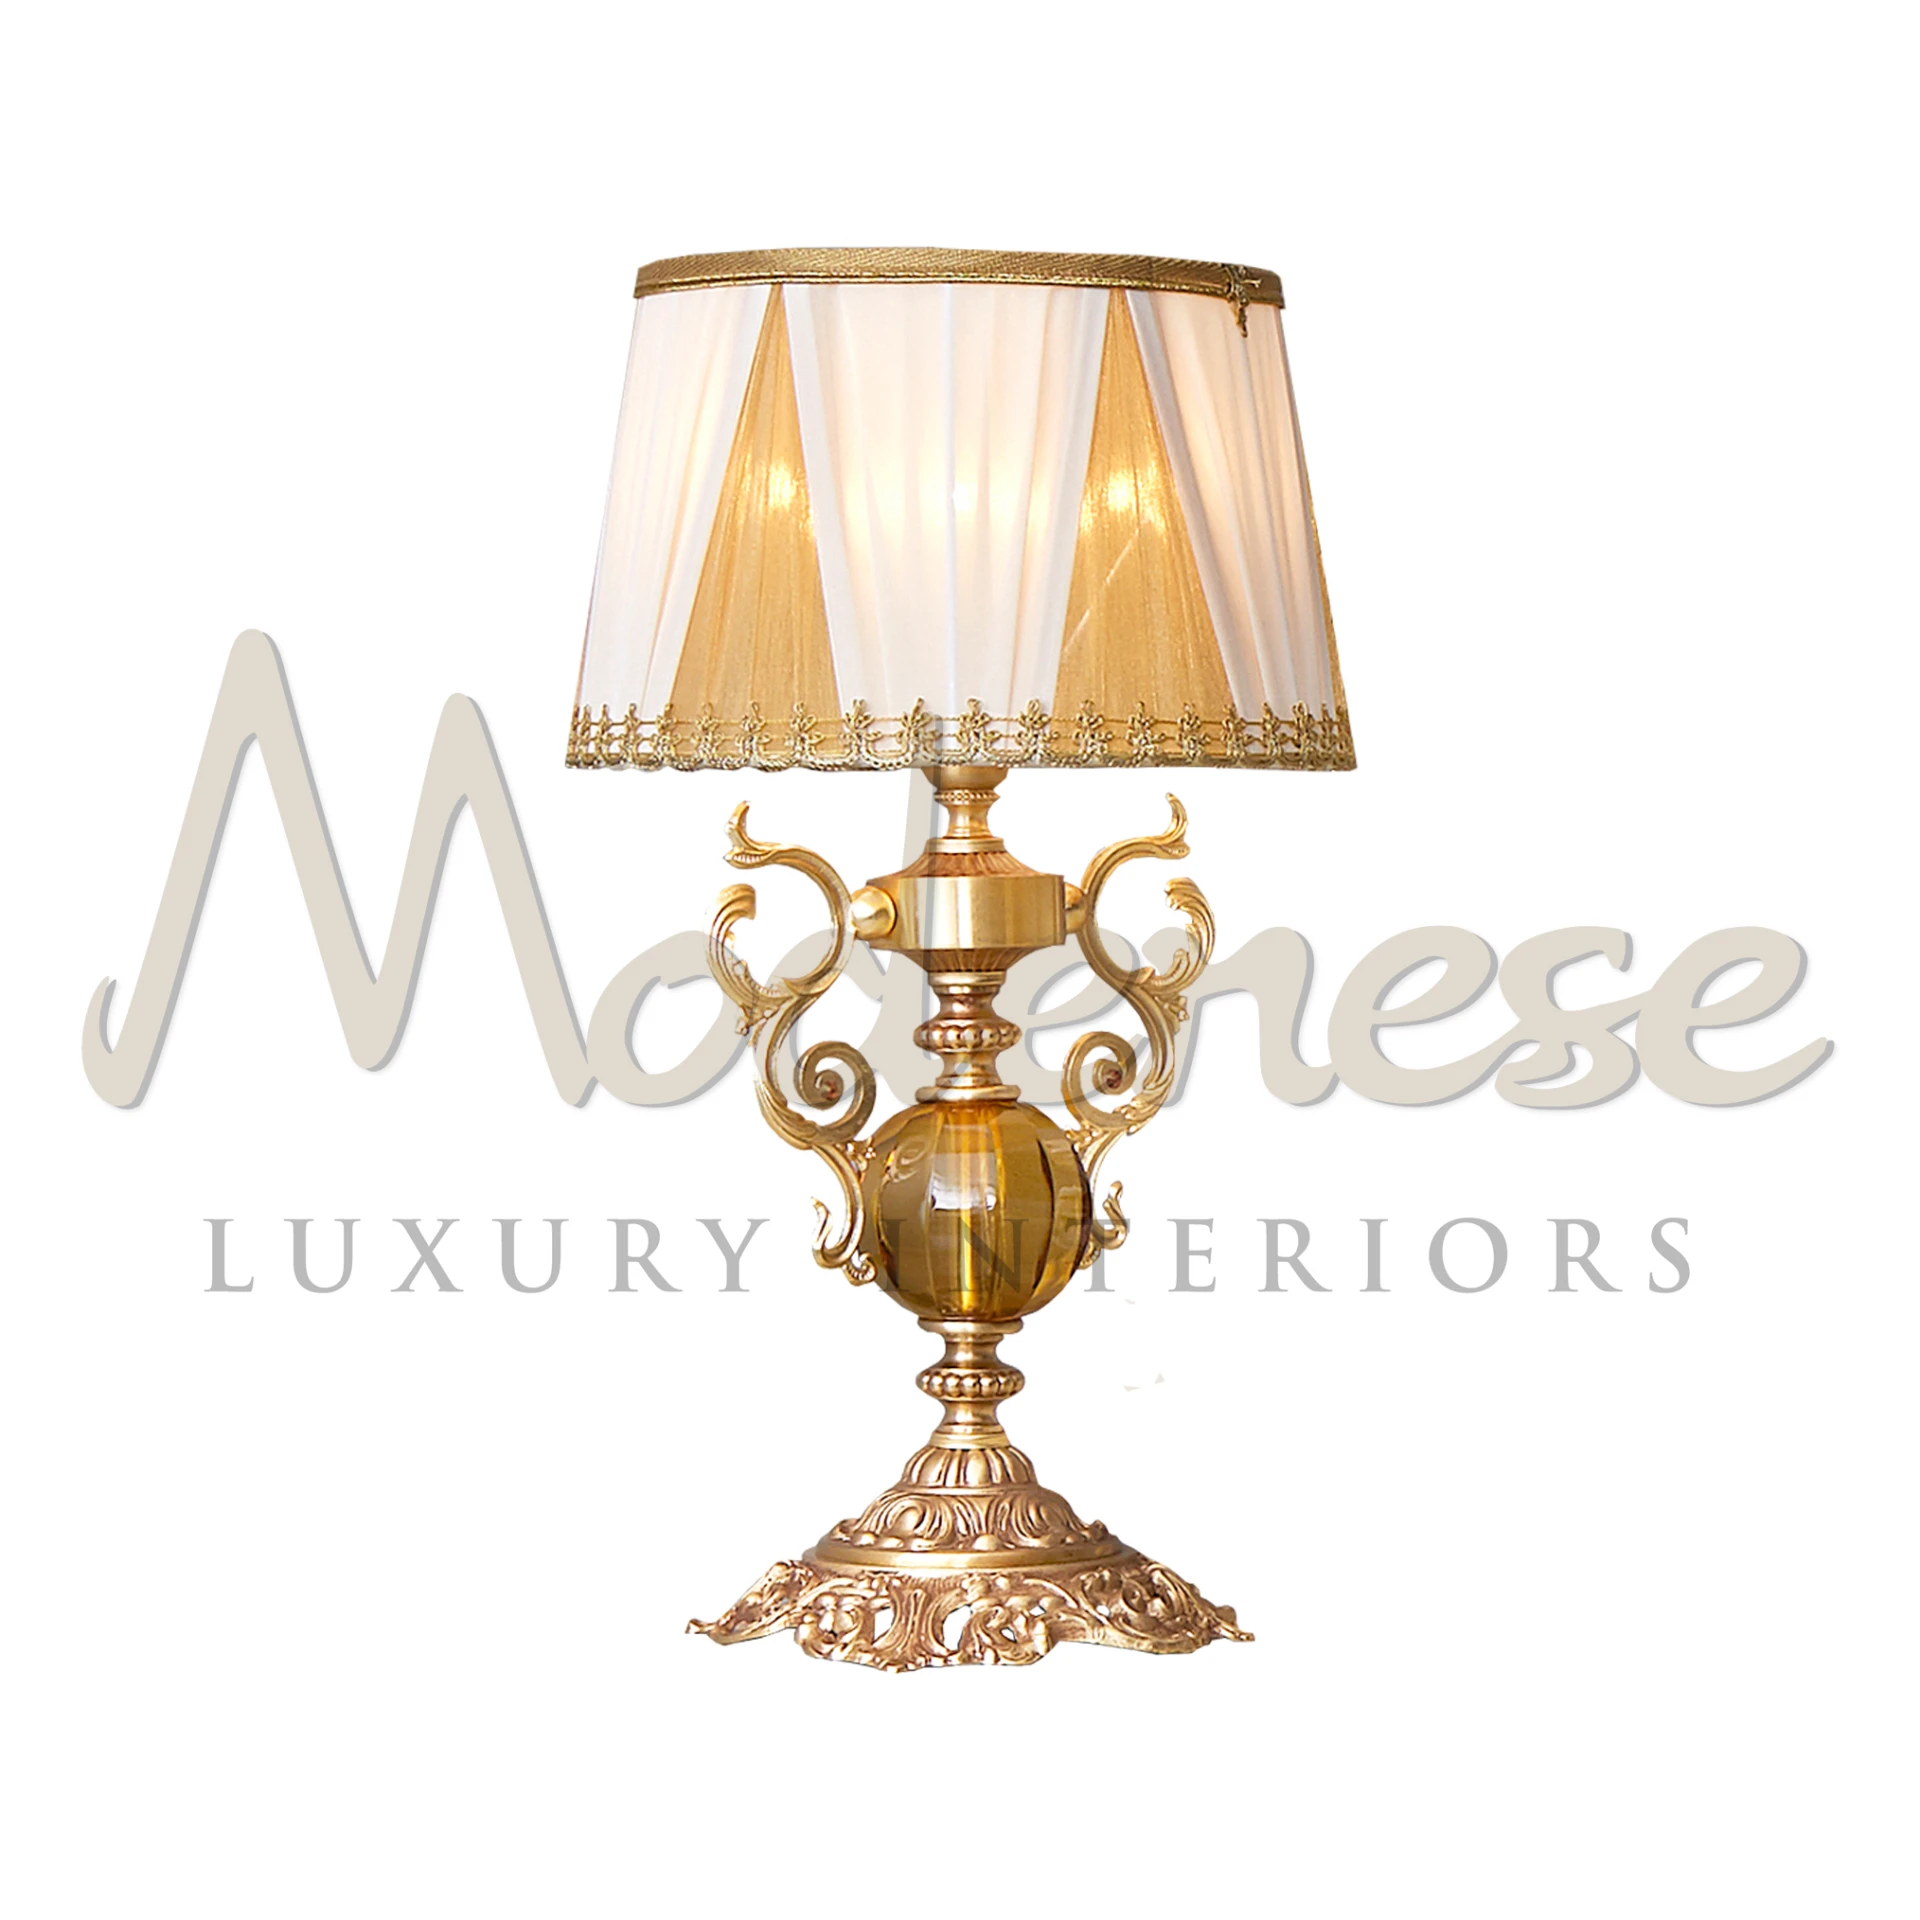 Elegant Radiance Table Lamp with a classic pleated shade and decorated gold design.